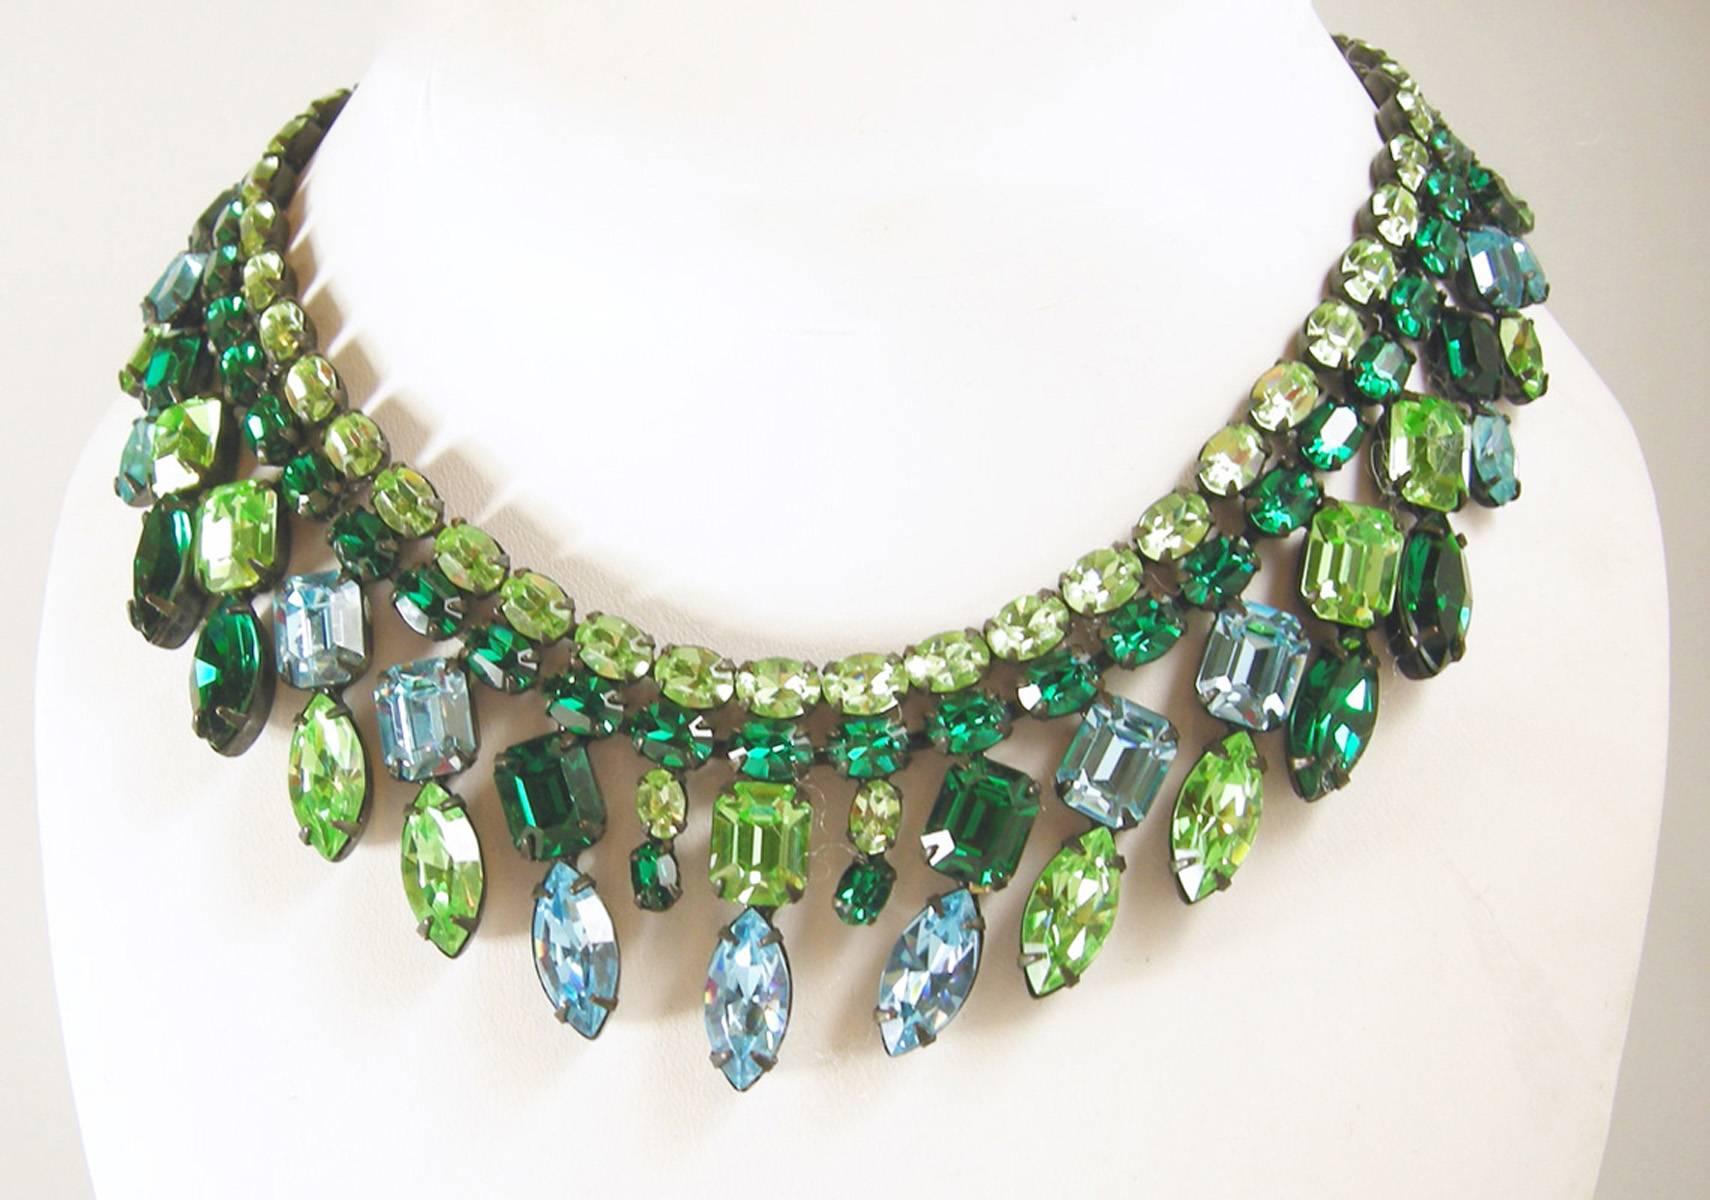 This vintage signed1950s Schreiner necklace has the inverted crystals that Schreiner is famous for. It combines different shapes and shades of green crystals creating a breathtaking collar necklace. The necklace is 14” x 1-1/2”. It has Japanned